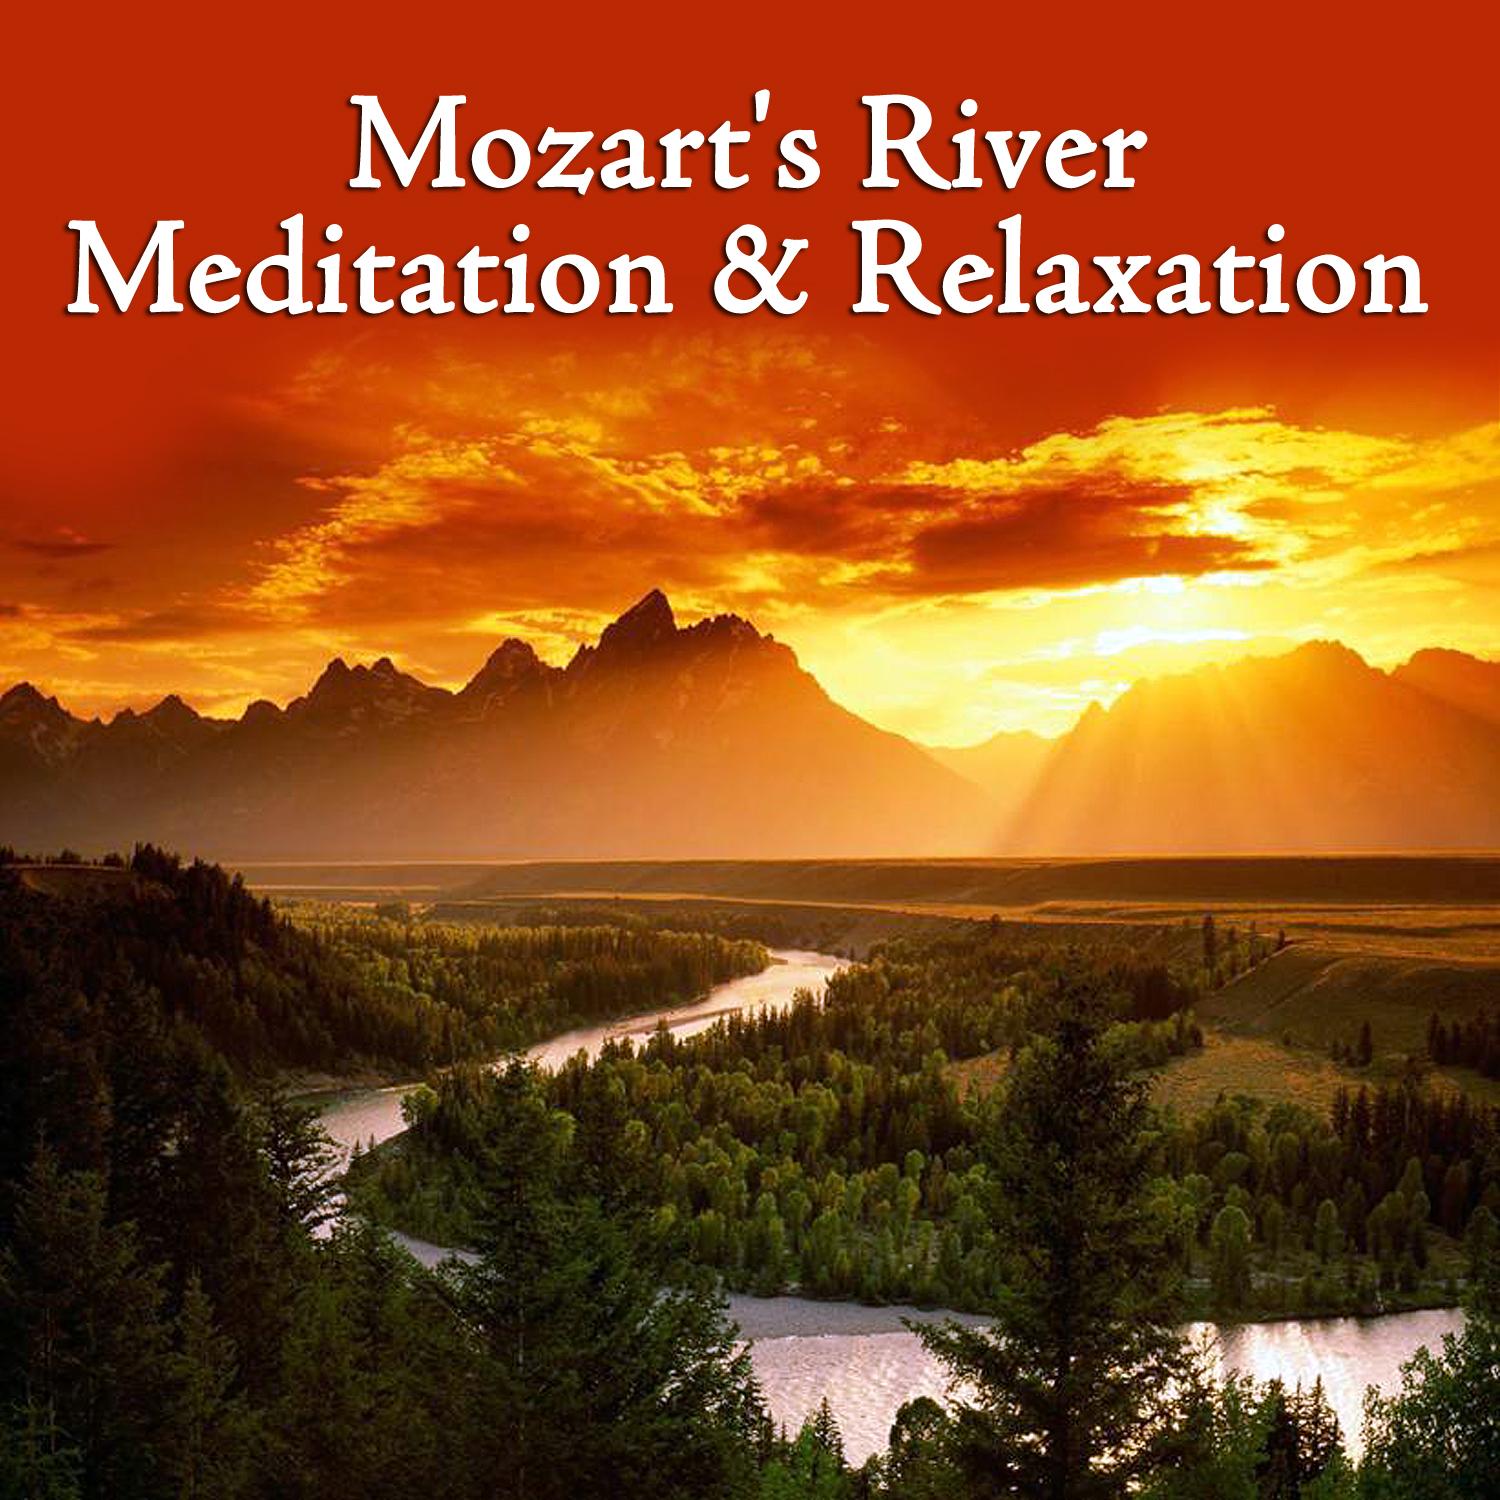 Mozart's River - Meditation & Relaxation